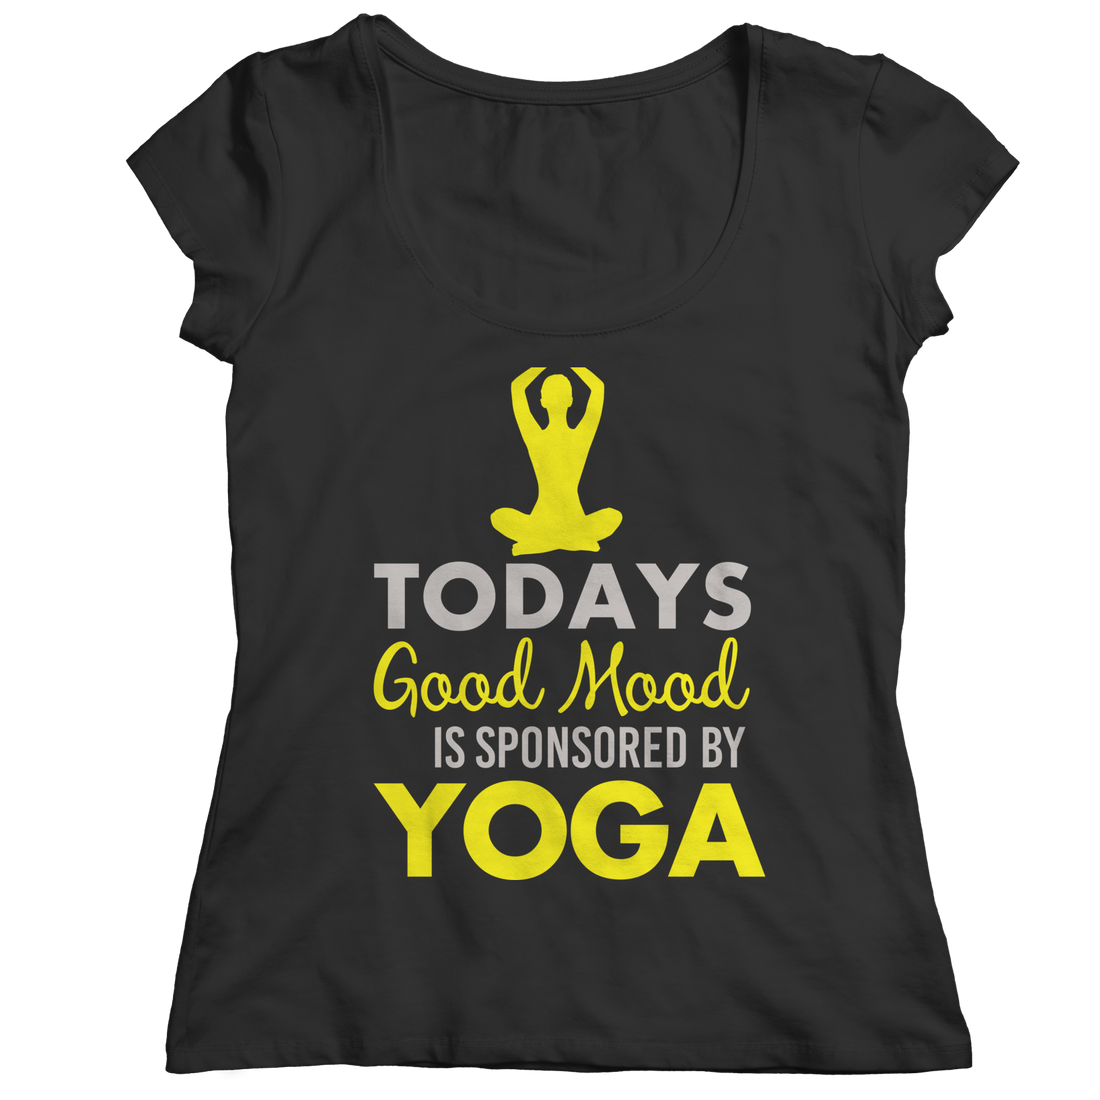 Limited Edition - Today's Good Mood Is Sponsored By Yoga